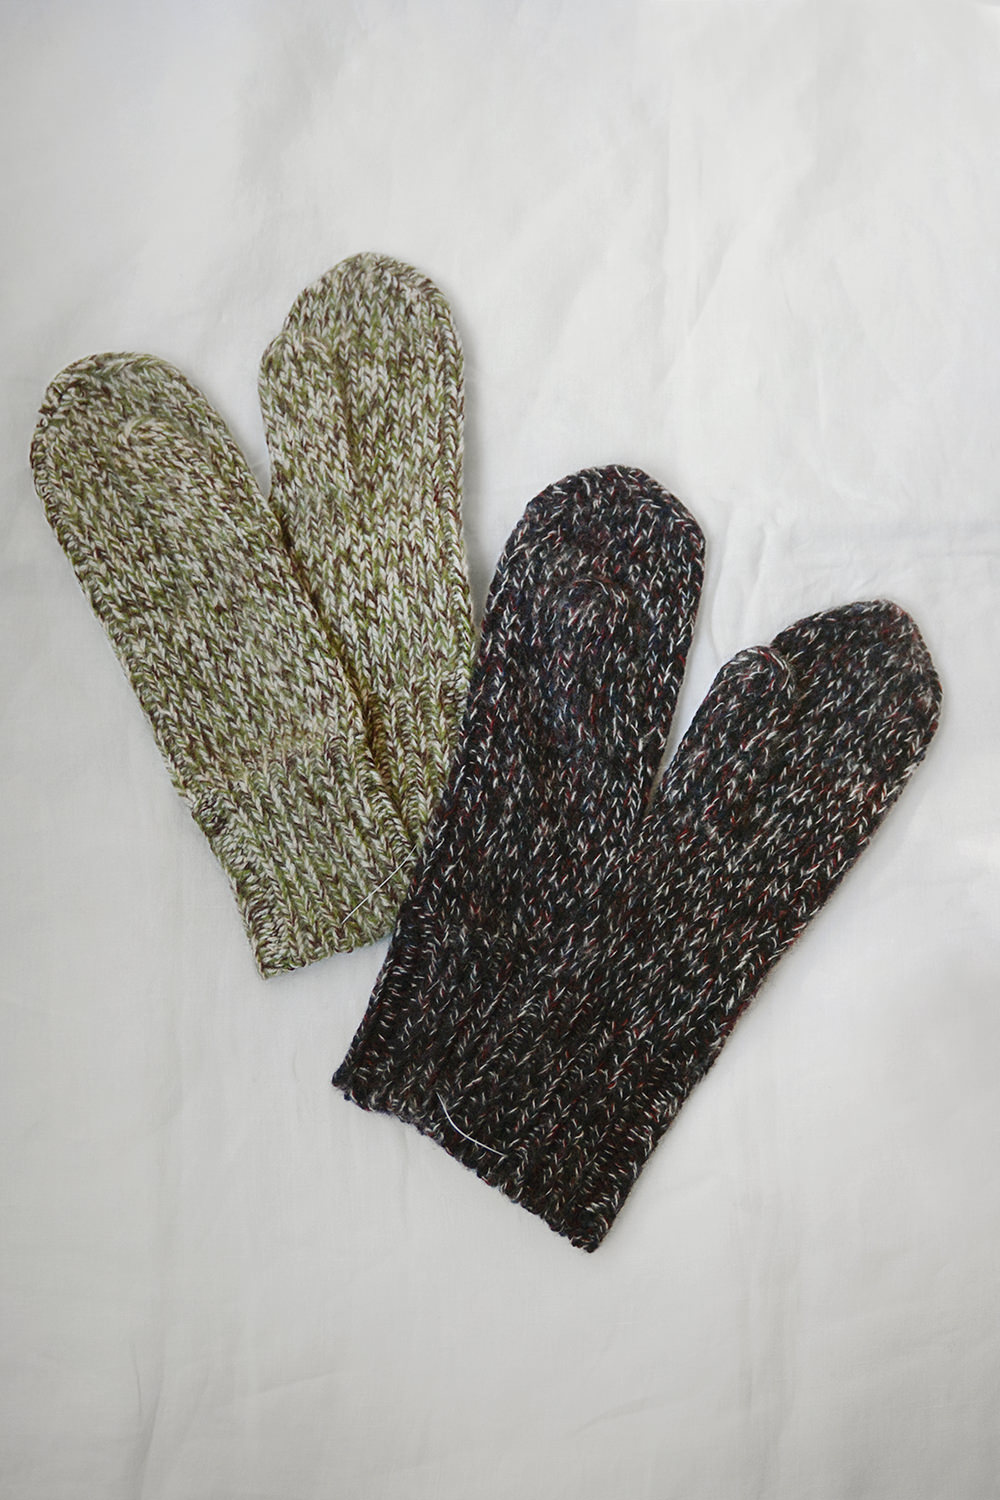 oats and rice cashmere wool mittens top picture